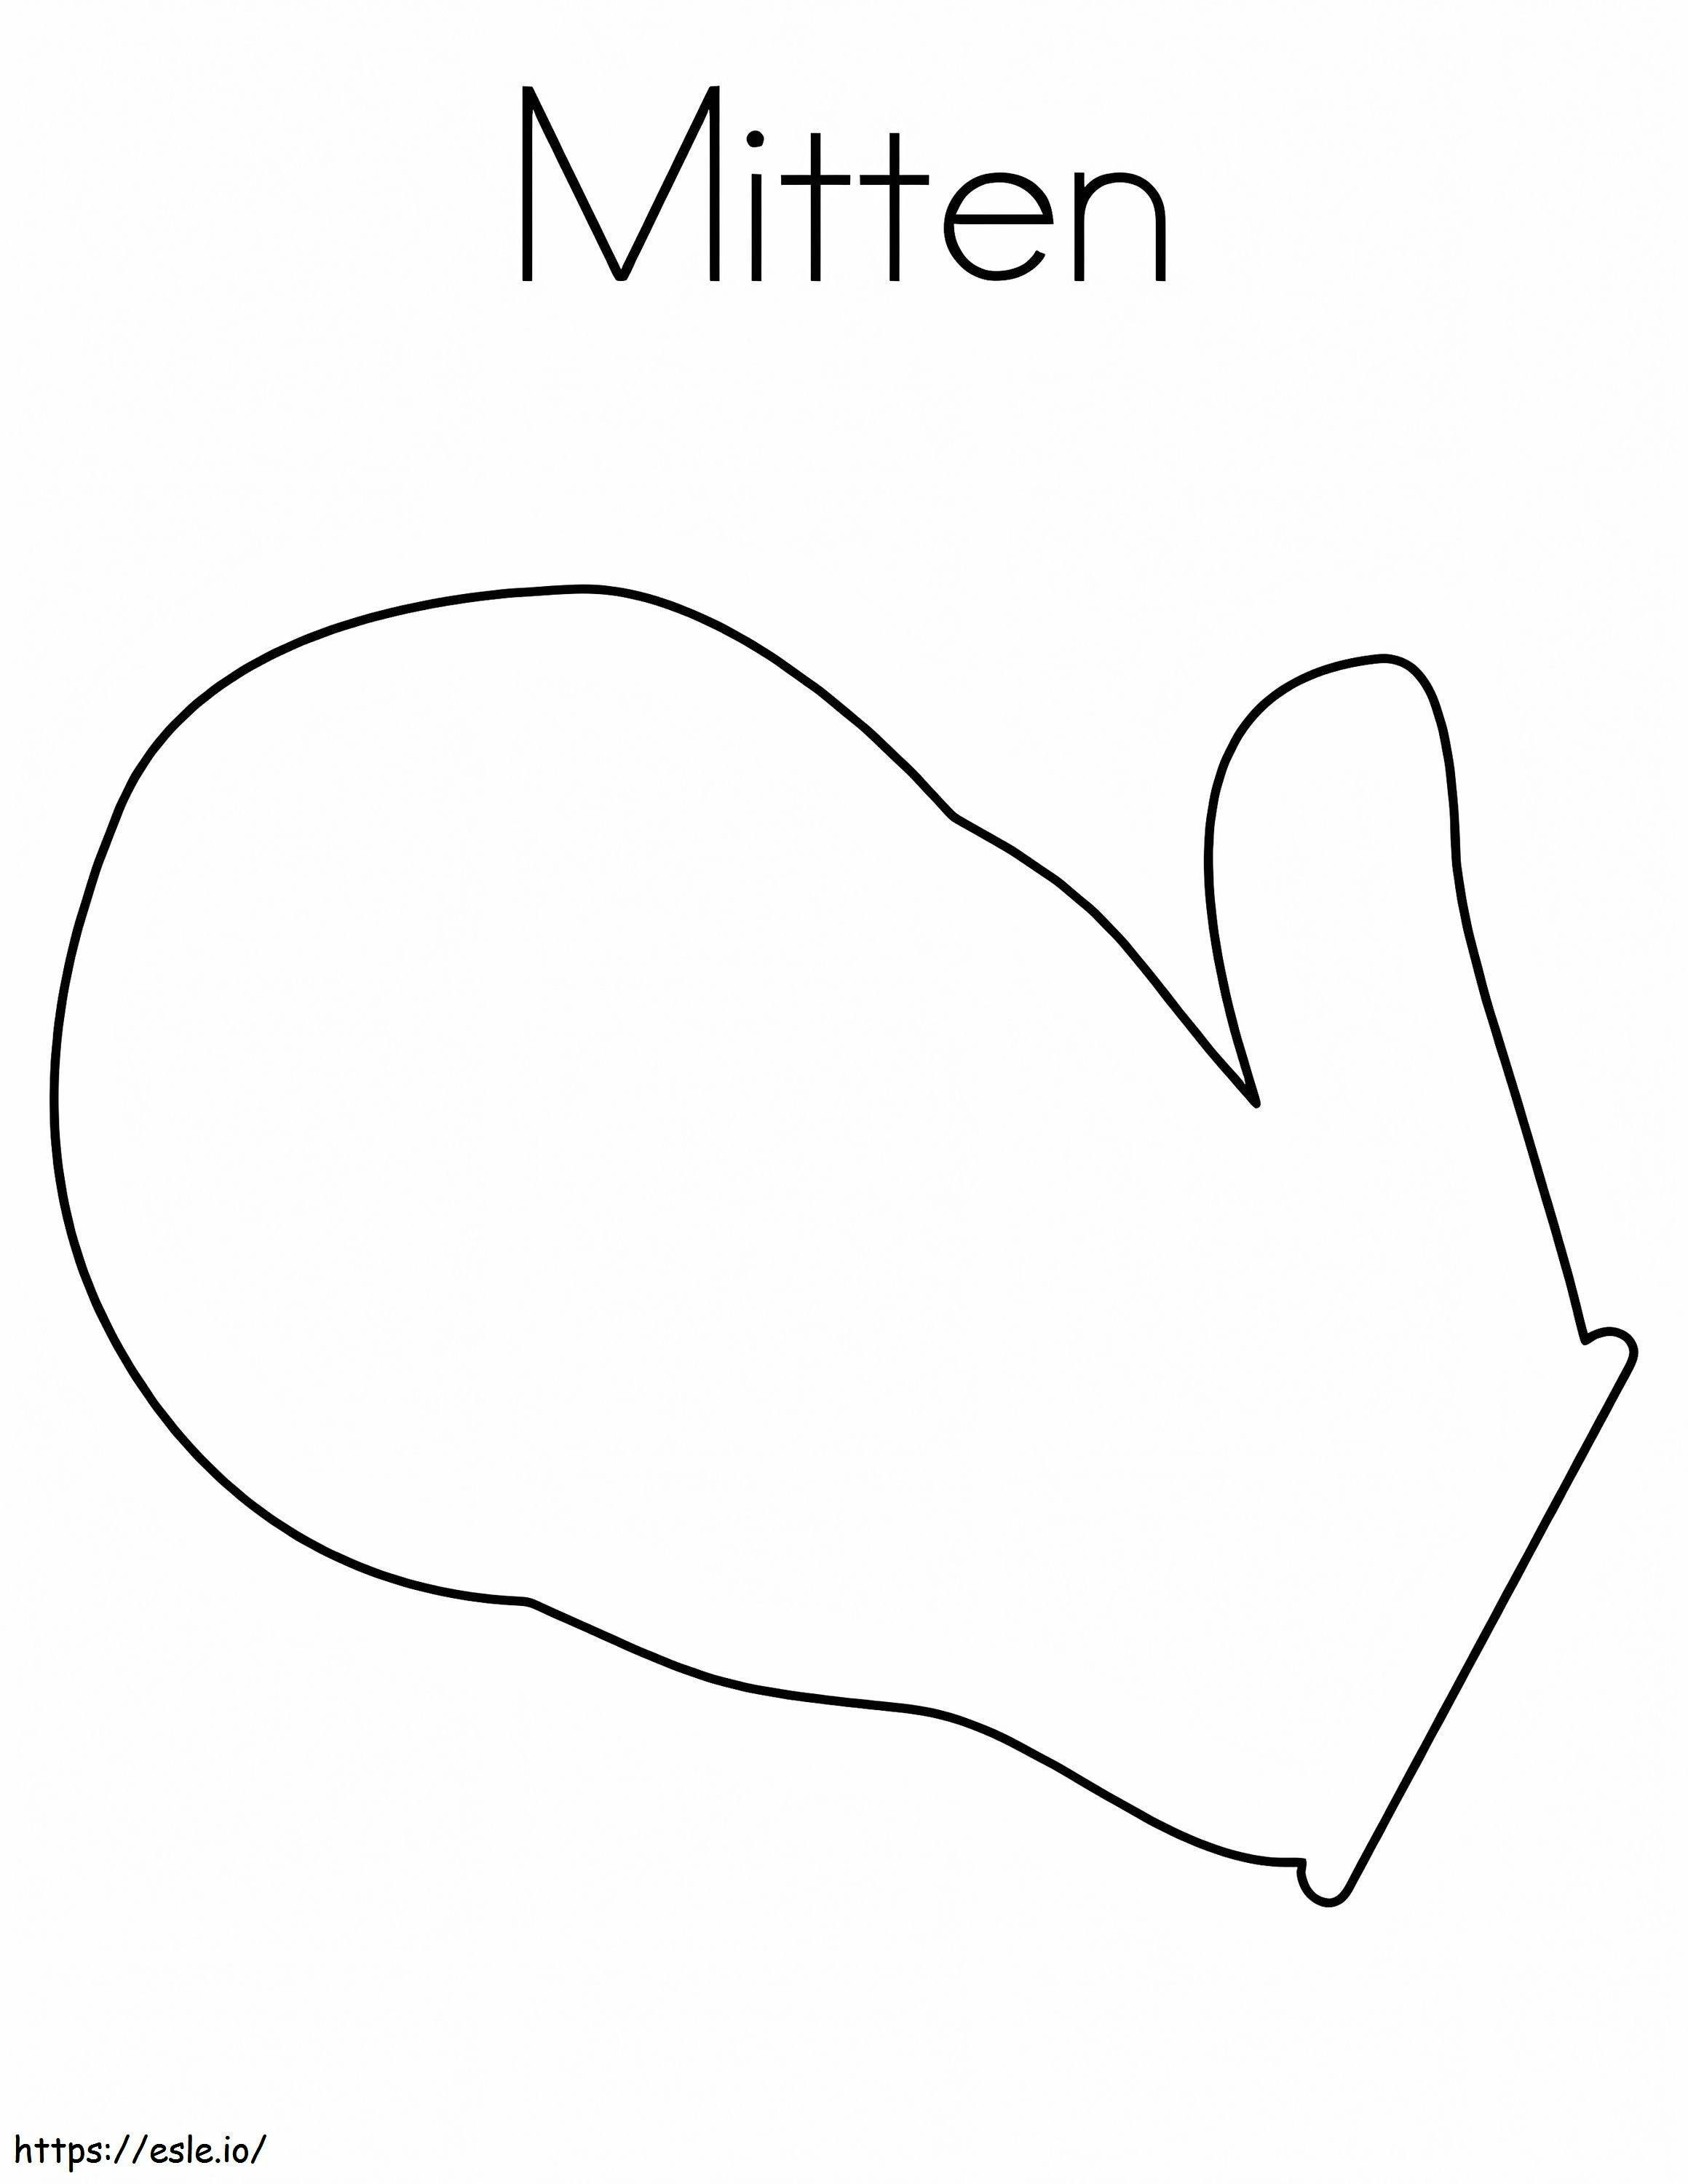 Simple Mitten coloring page